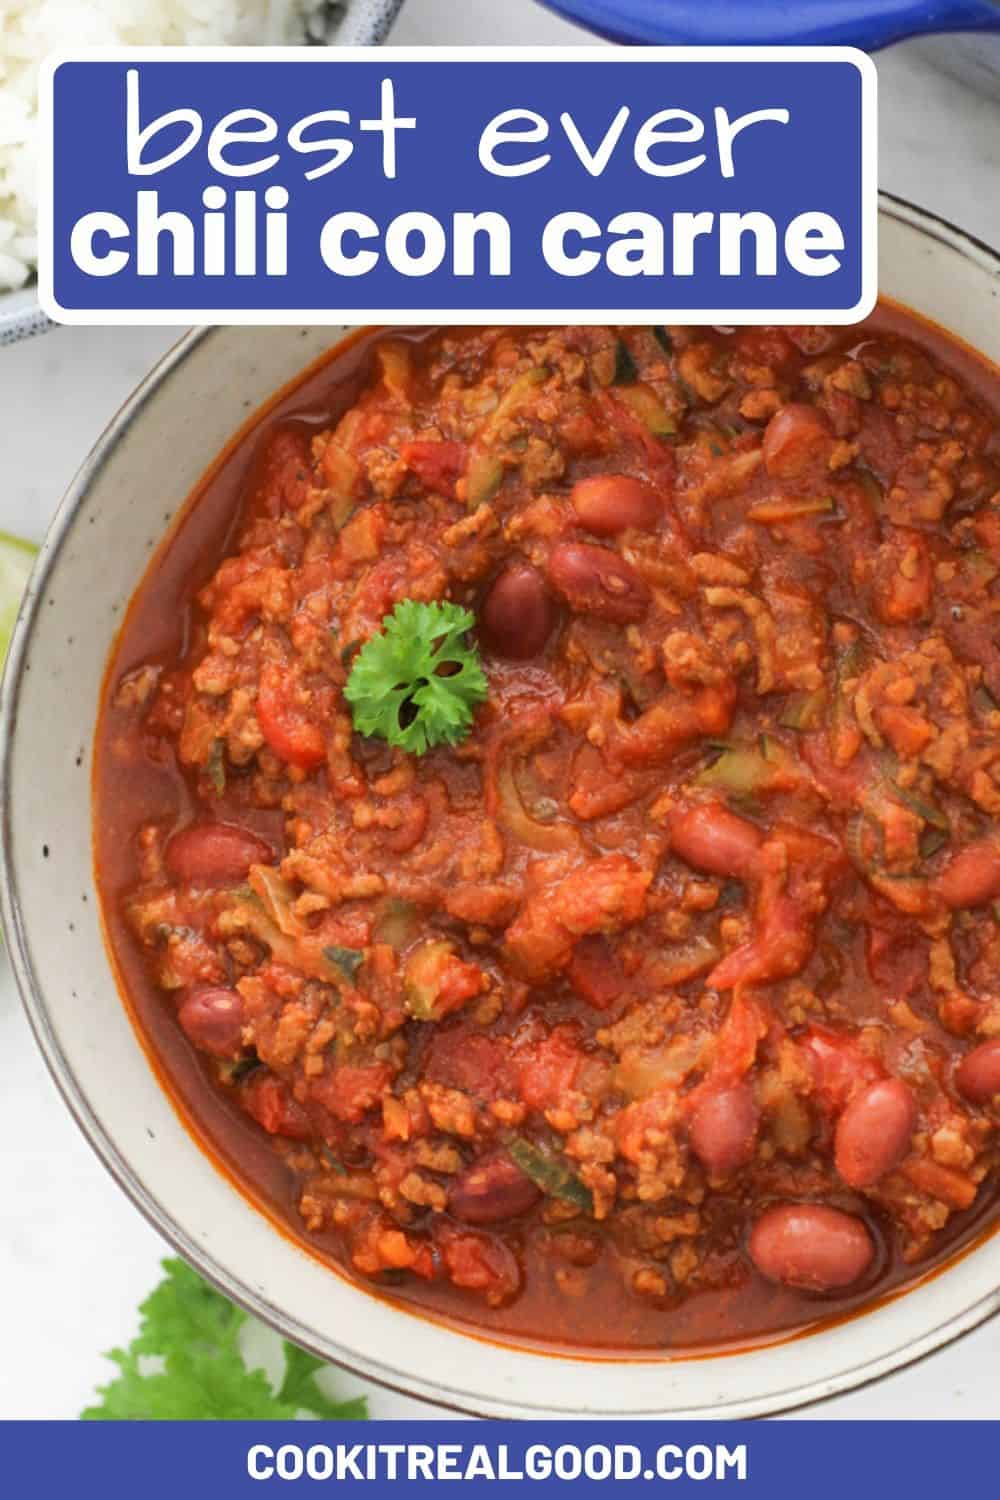 Healthy Chilli Con Carne - Cook it Real Good